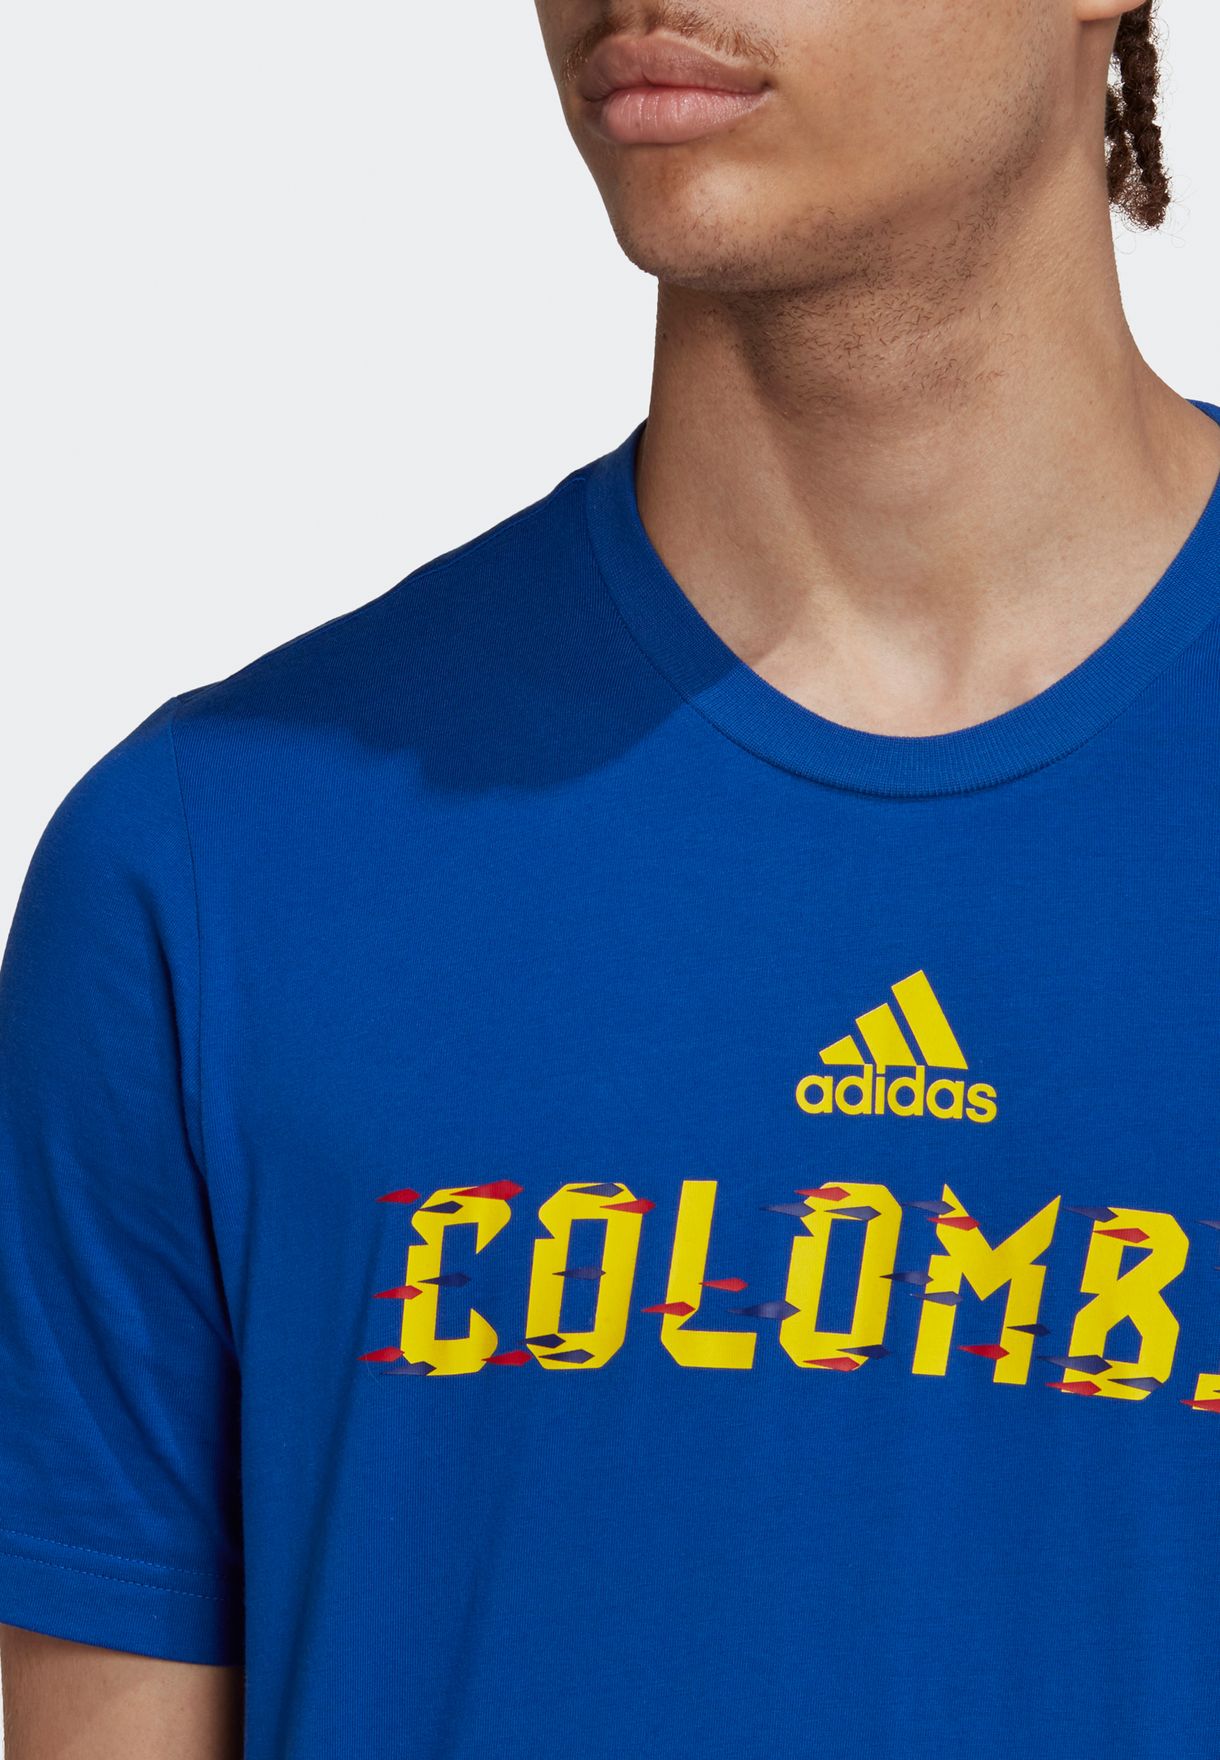 Colombia  Logo  T-Shirt